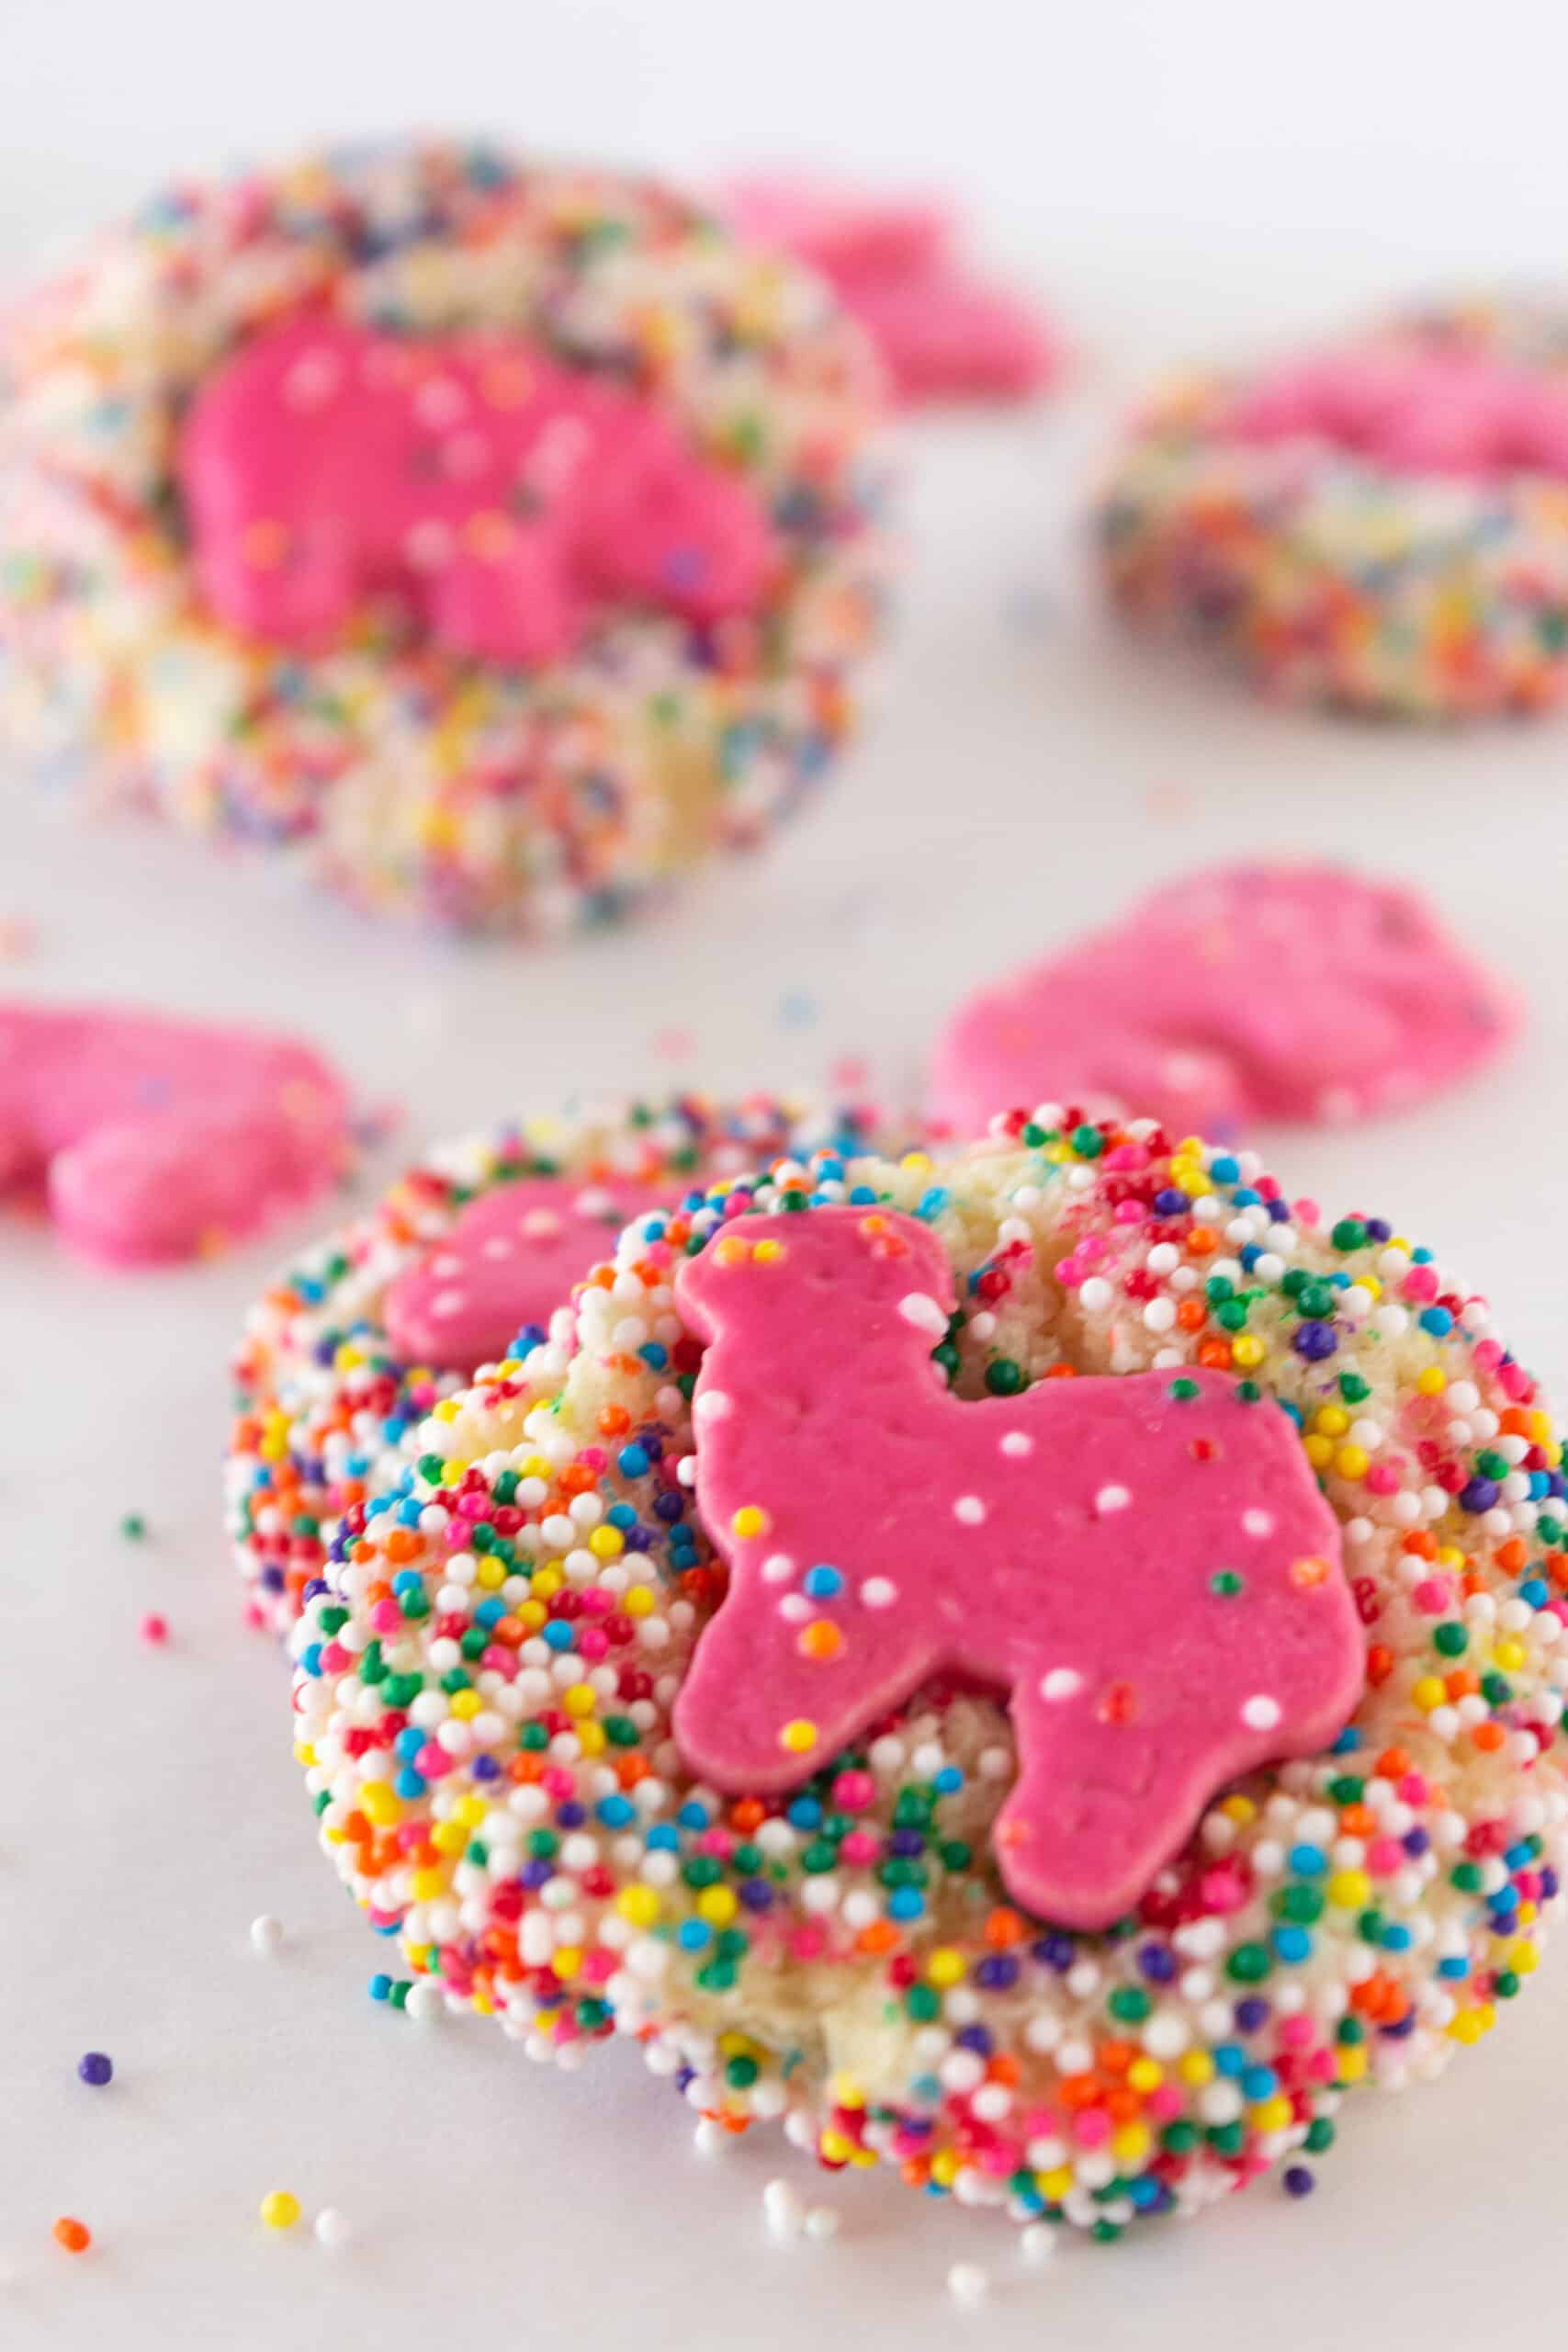  Frosted Animal Cookies Recipe made with a cake mix, featured by top US cookies blogger, Practically Homemade